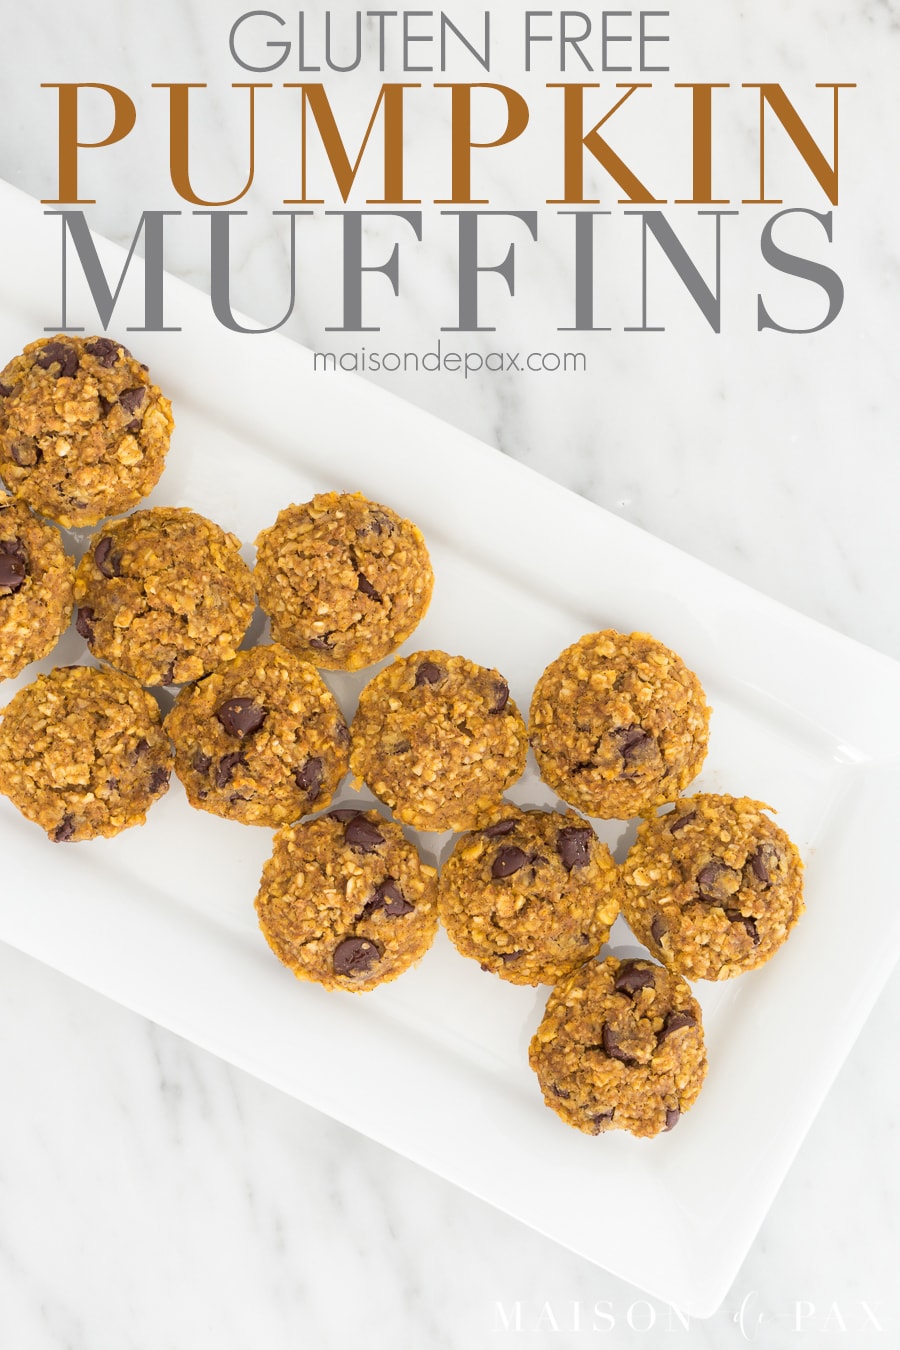 Gluten free pumpkin muffins with chocolate chips recipe: Made with applesauce and a touch of maple syrup for sweetening, oat flour, and pumpkin, these are packed with delicious flavor and nutritious ingredients #gf #glutenfree #pumpkinspice #fallrecipe #pumpkinrecipe #pumpkinmuffins #breakfast #gfbreakfast